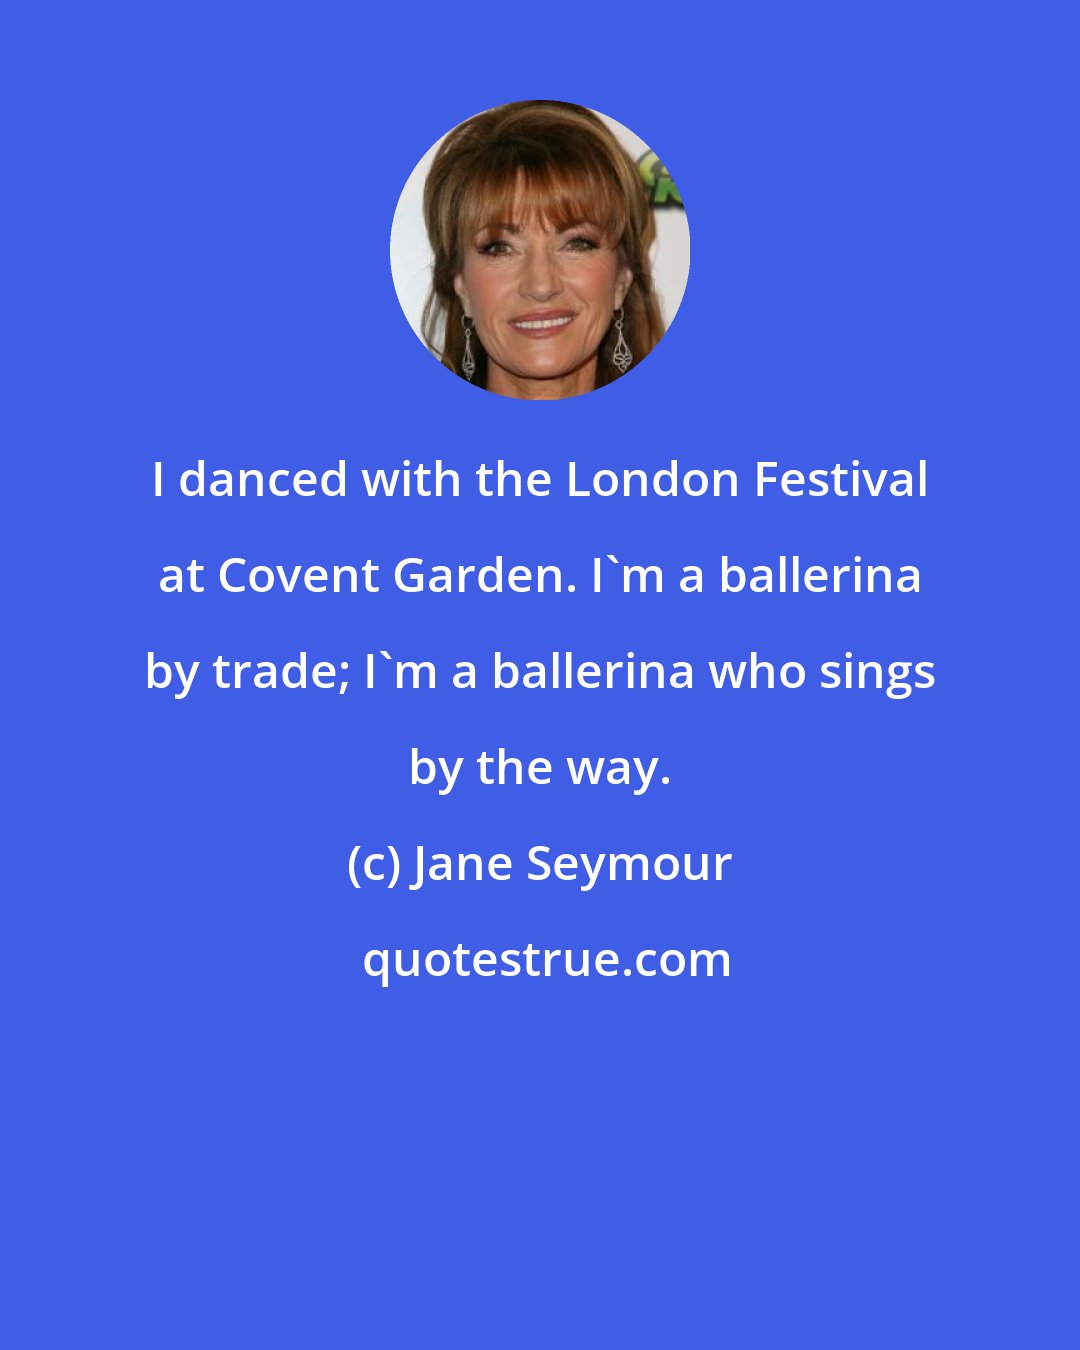 Jane Seymour: I danced with the London Festival at Covent Garden. I'm a ballerina by trade; I'm a ballerina who sings by the way.